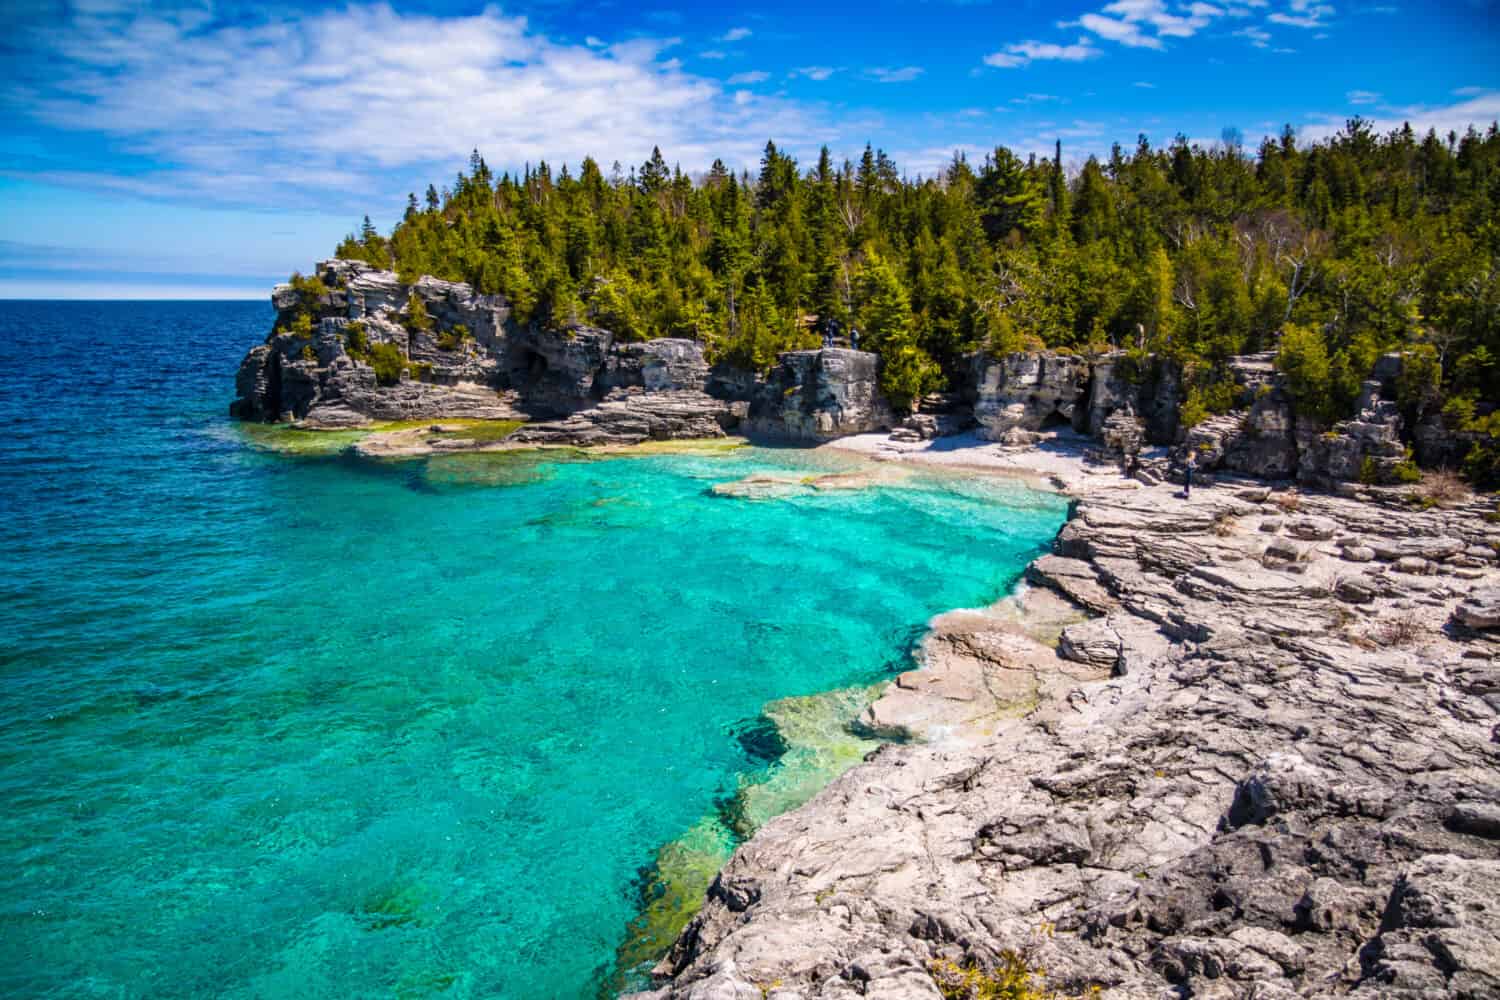 The Indian Head Cove in The Bruce Peninsula National Park, Ontario, Canada